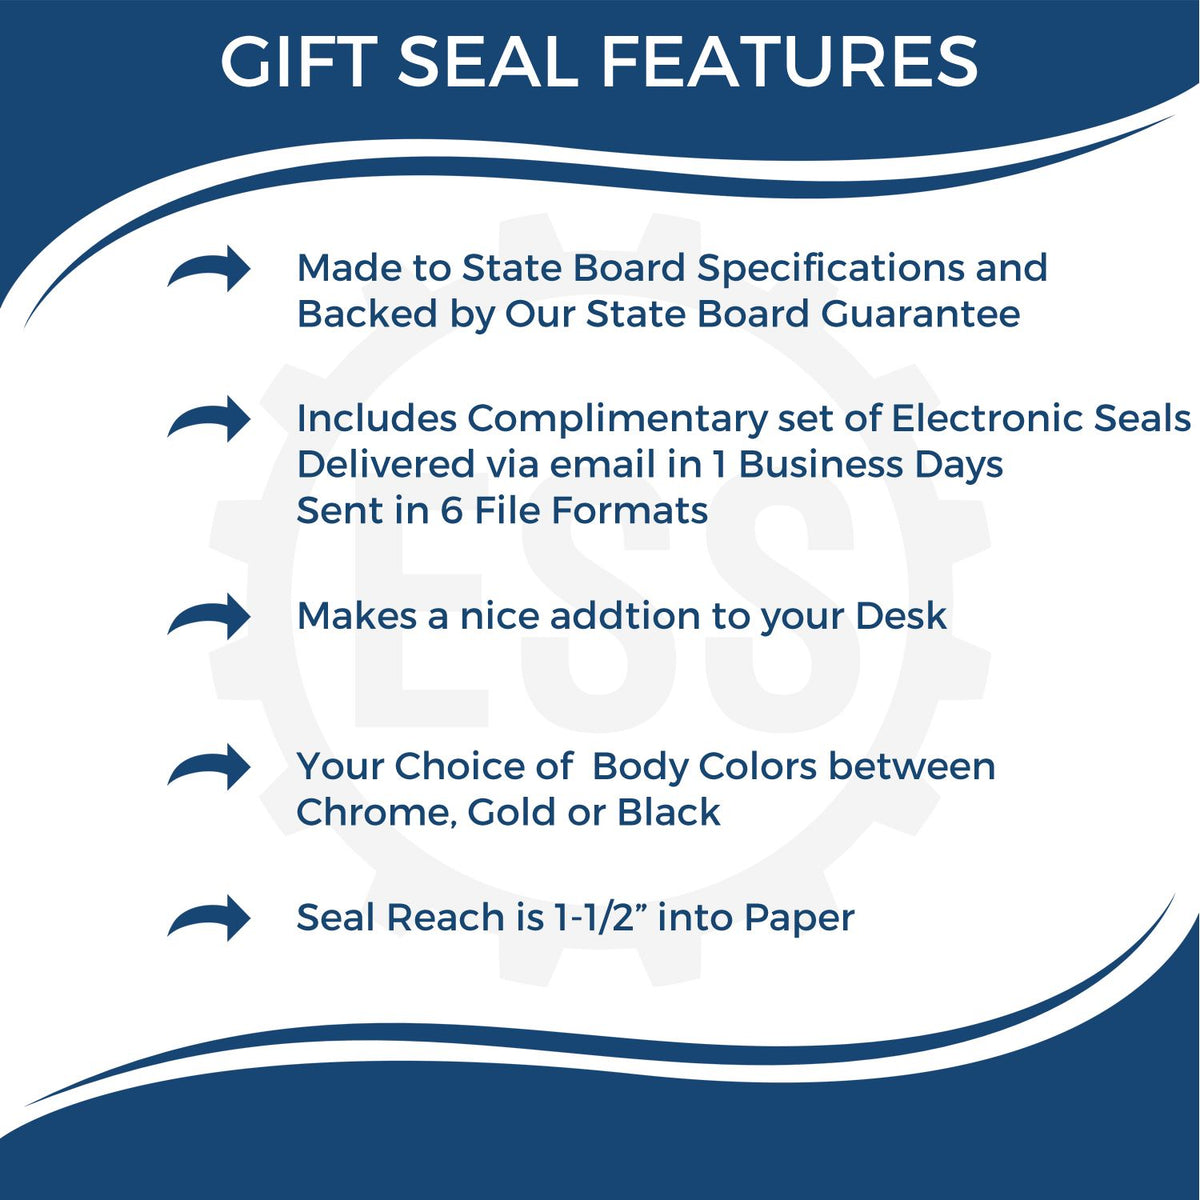 A picture of an infographic highlighting the selling points for the Gift Rhode Island Landscape Architect Seal